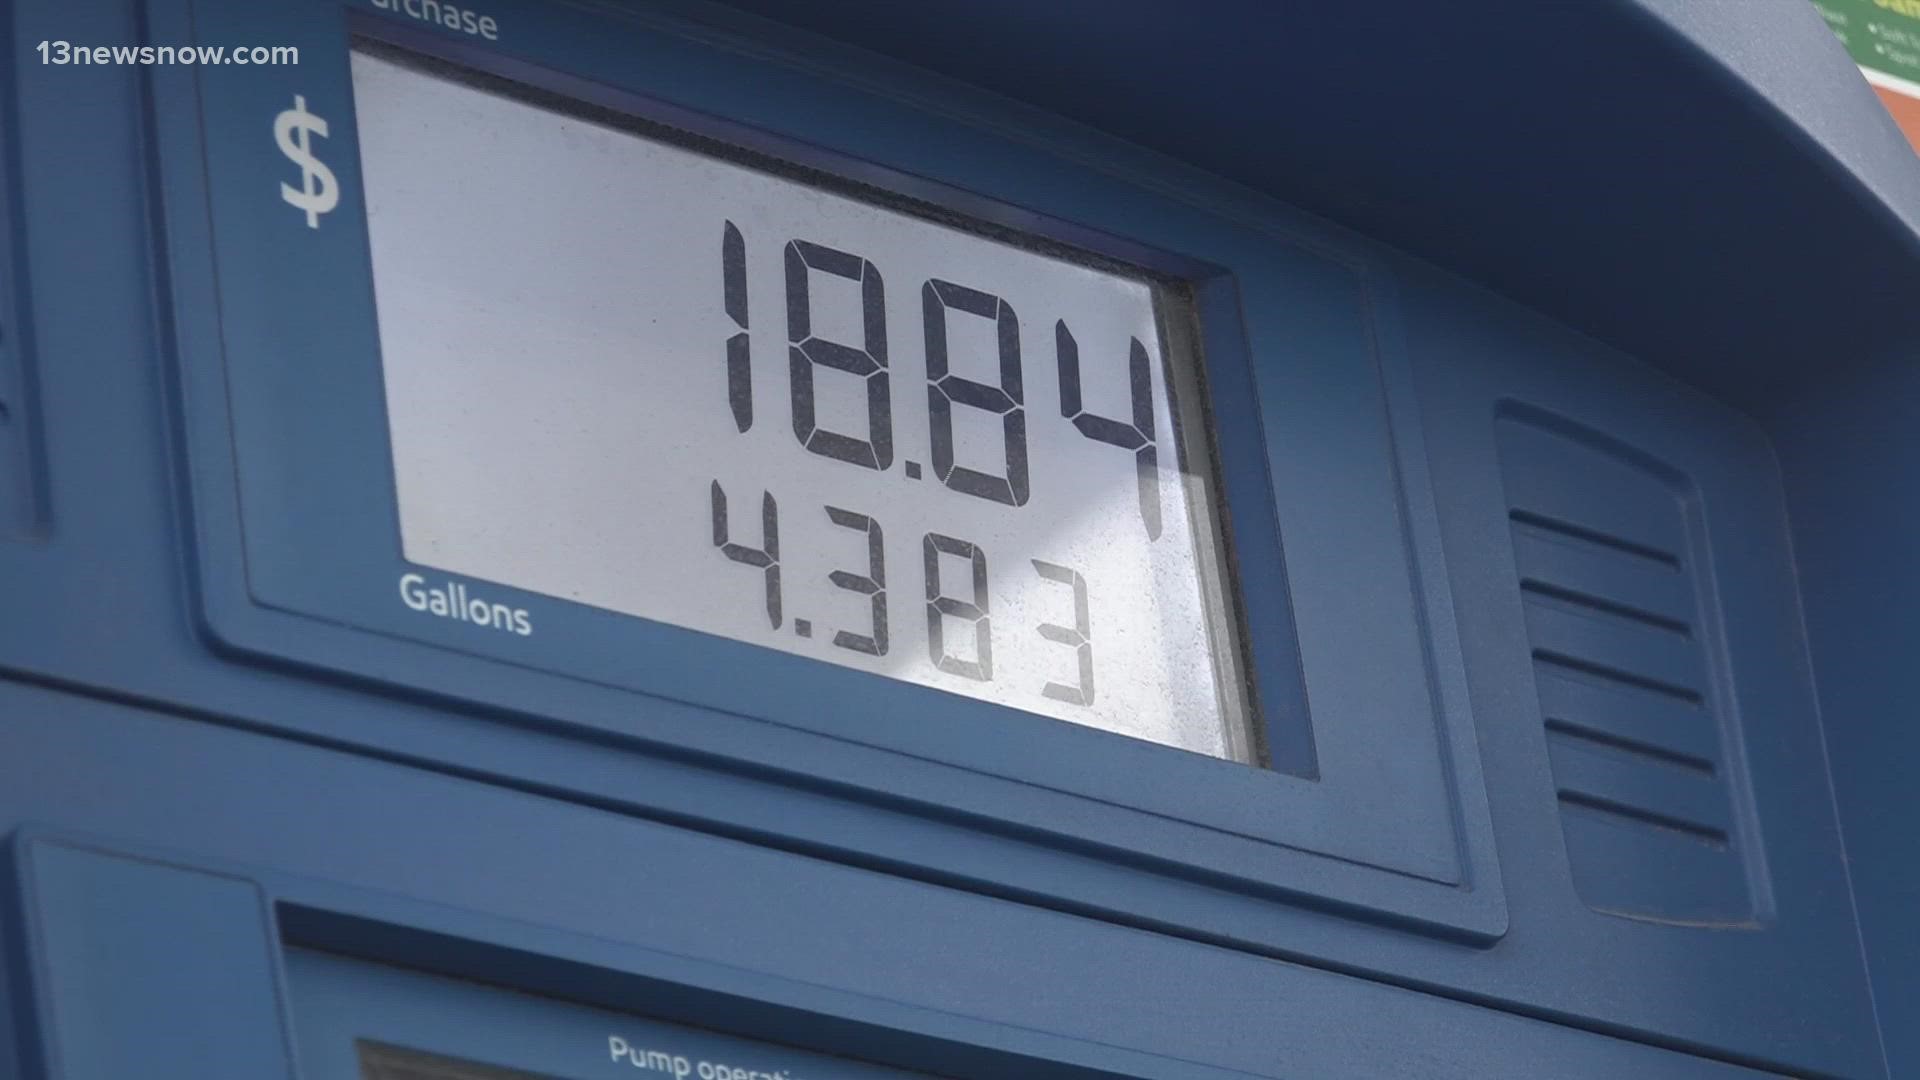 When you compare gas prices today and in 2008, it looks like the U.S is reaching a record-high.